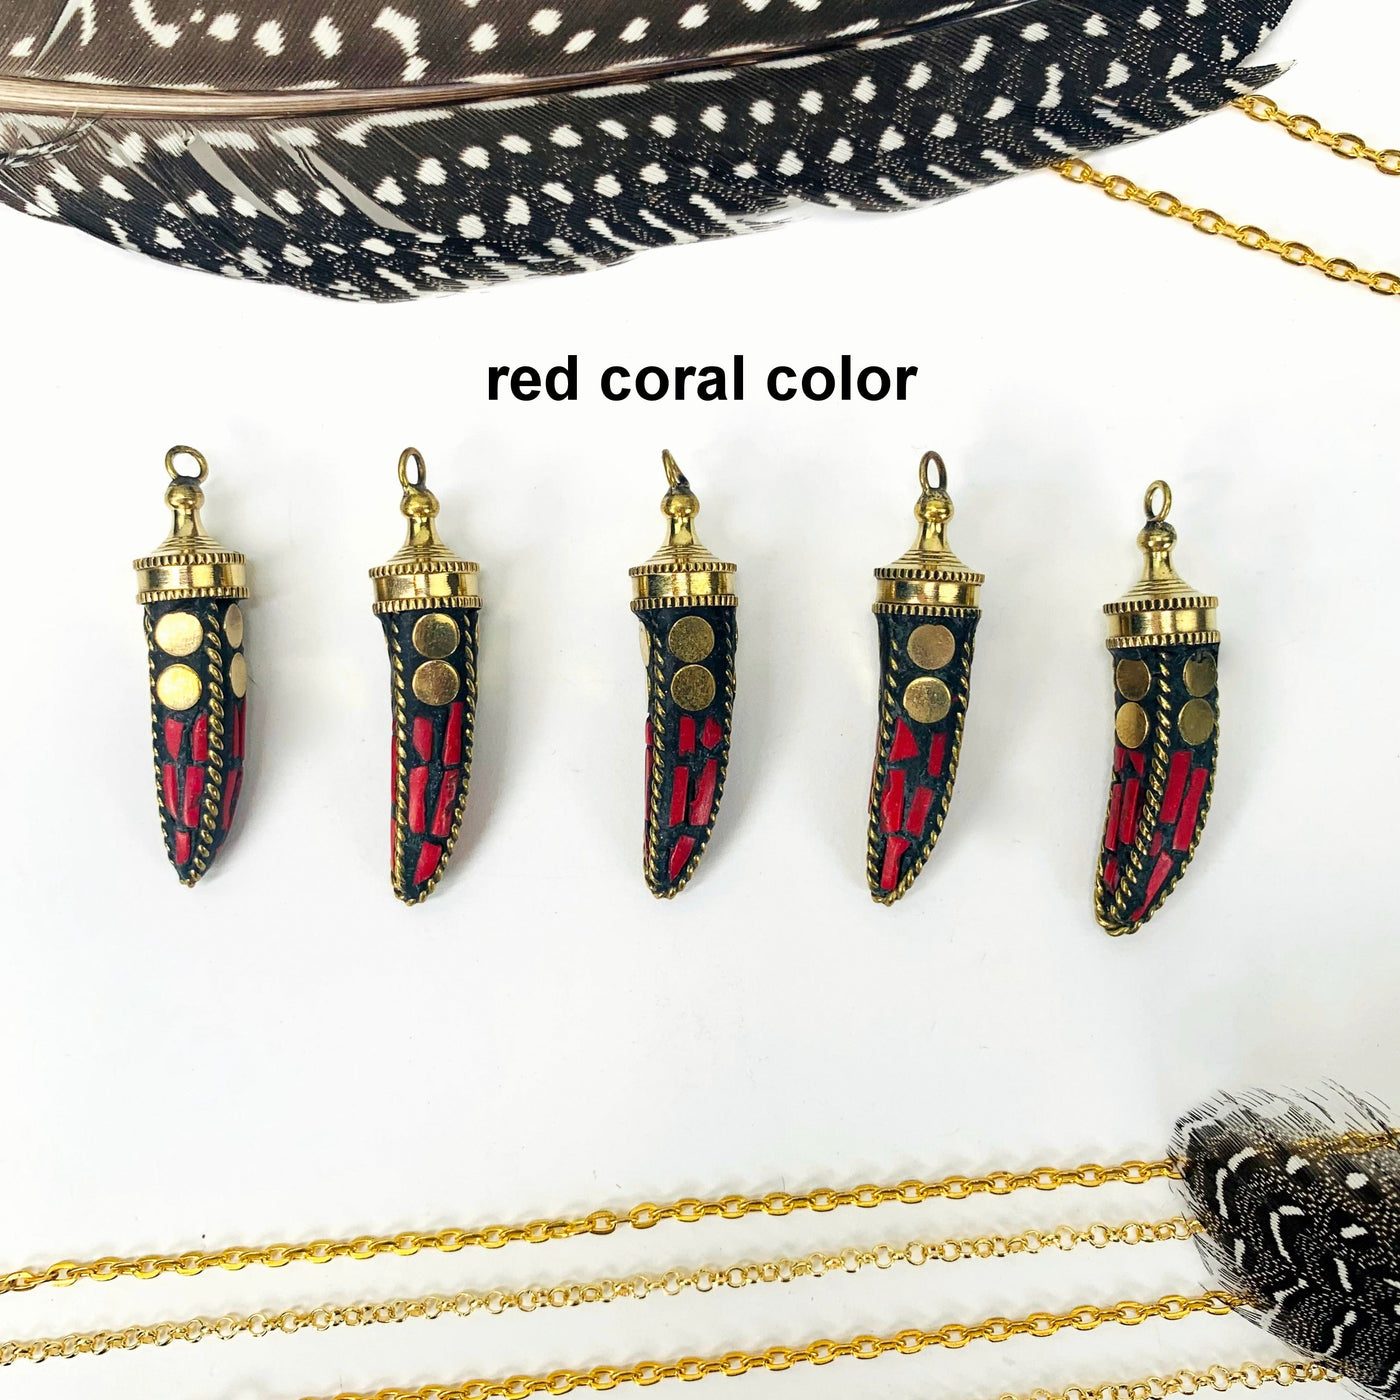 overhead view of five red coral color petite mosaic horn pendants in a row on white background with decorations for possible variations